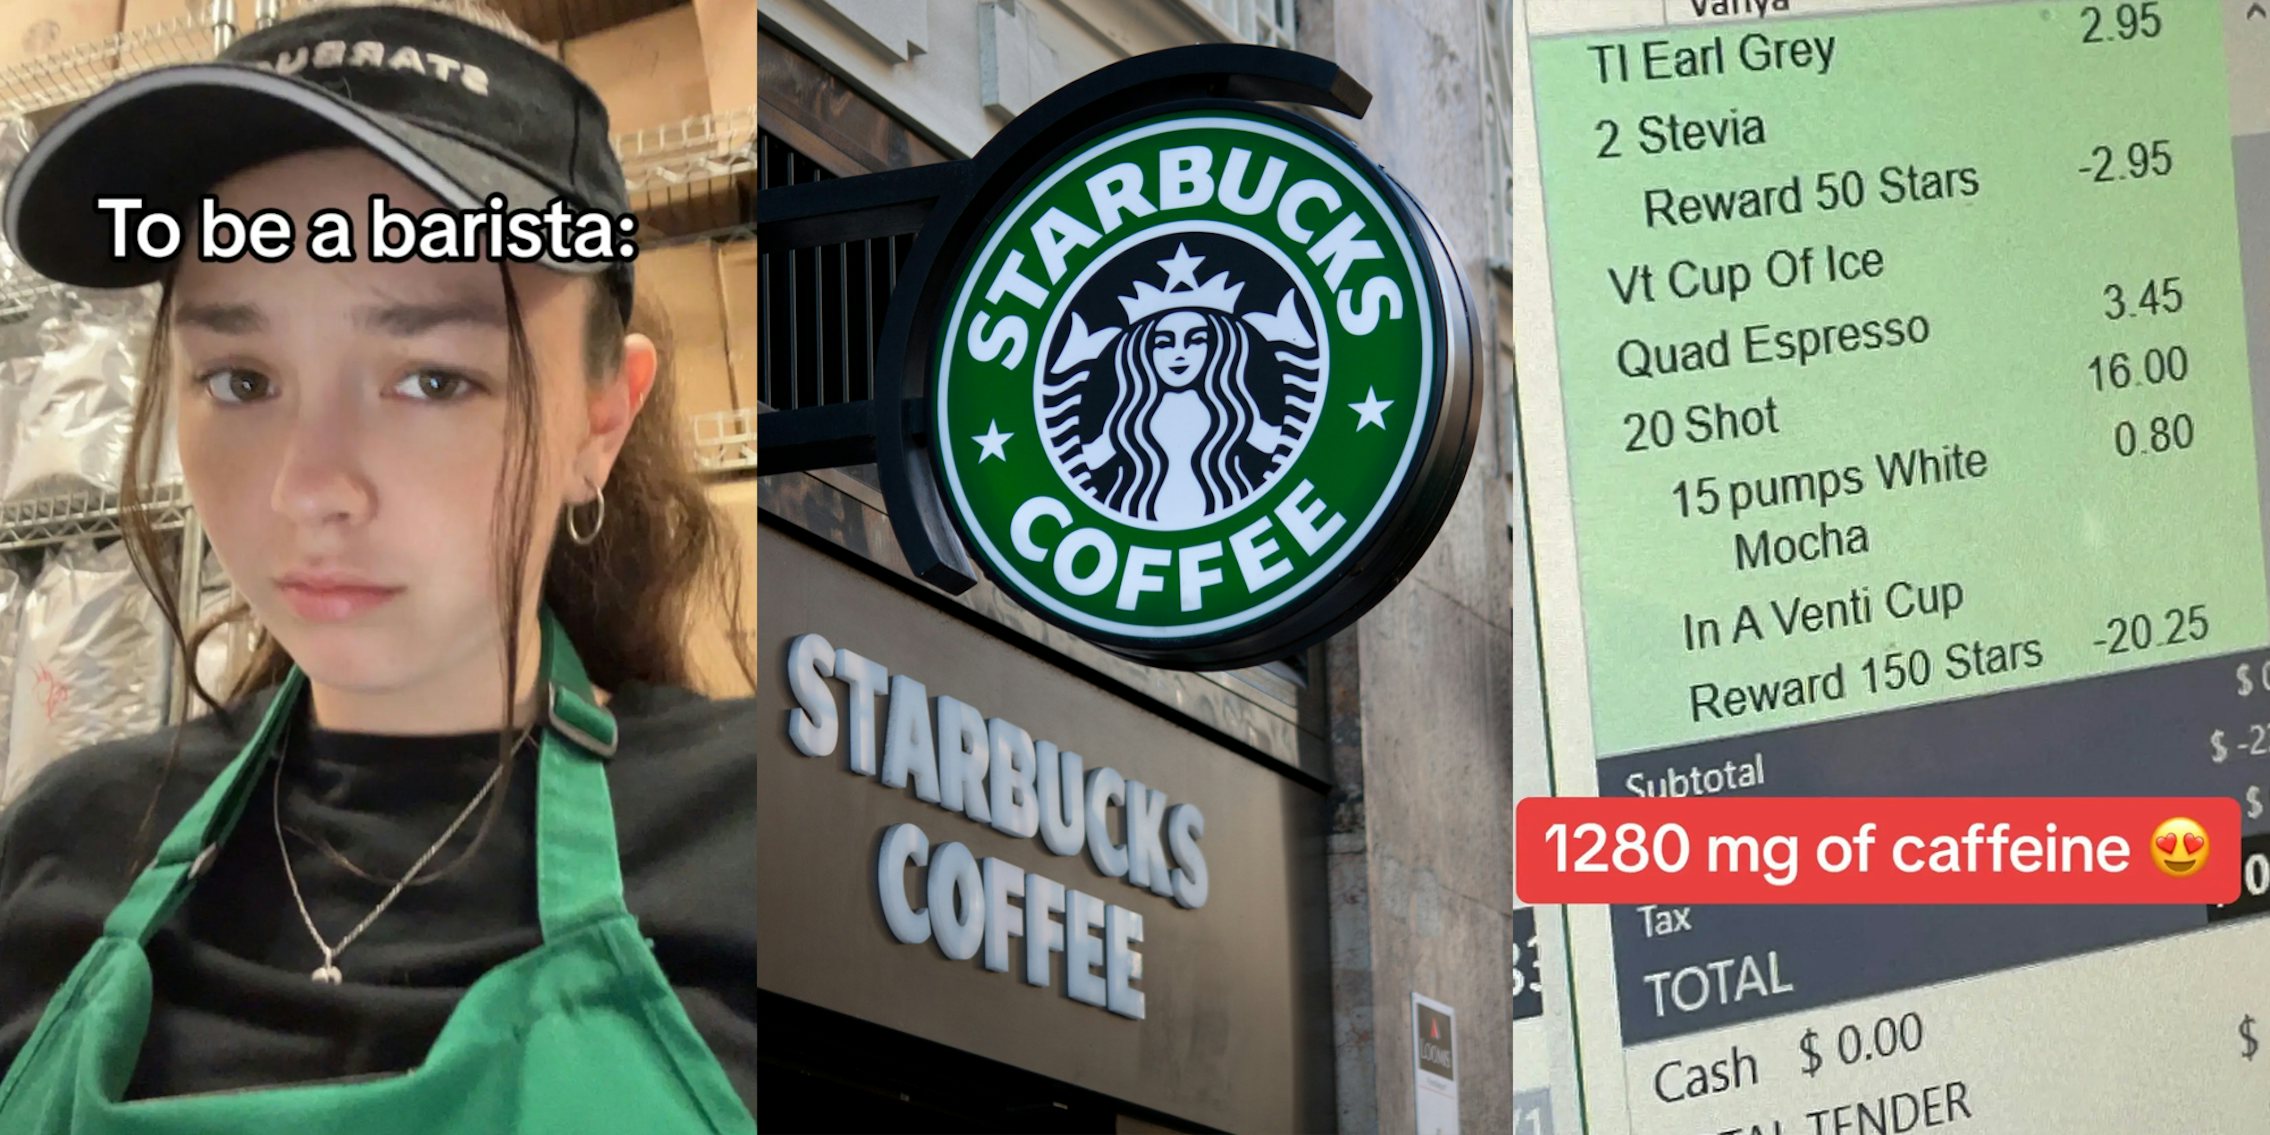 Starbucks barista with caption 'To be a barista:' (l) Starbucks signs on building (c) Starbucks order screen with caption '1280 mg of caffeine' (r)